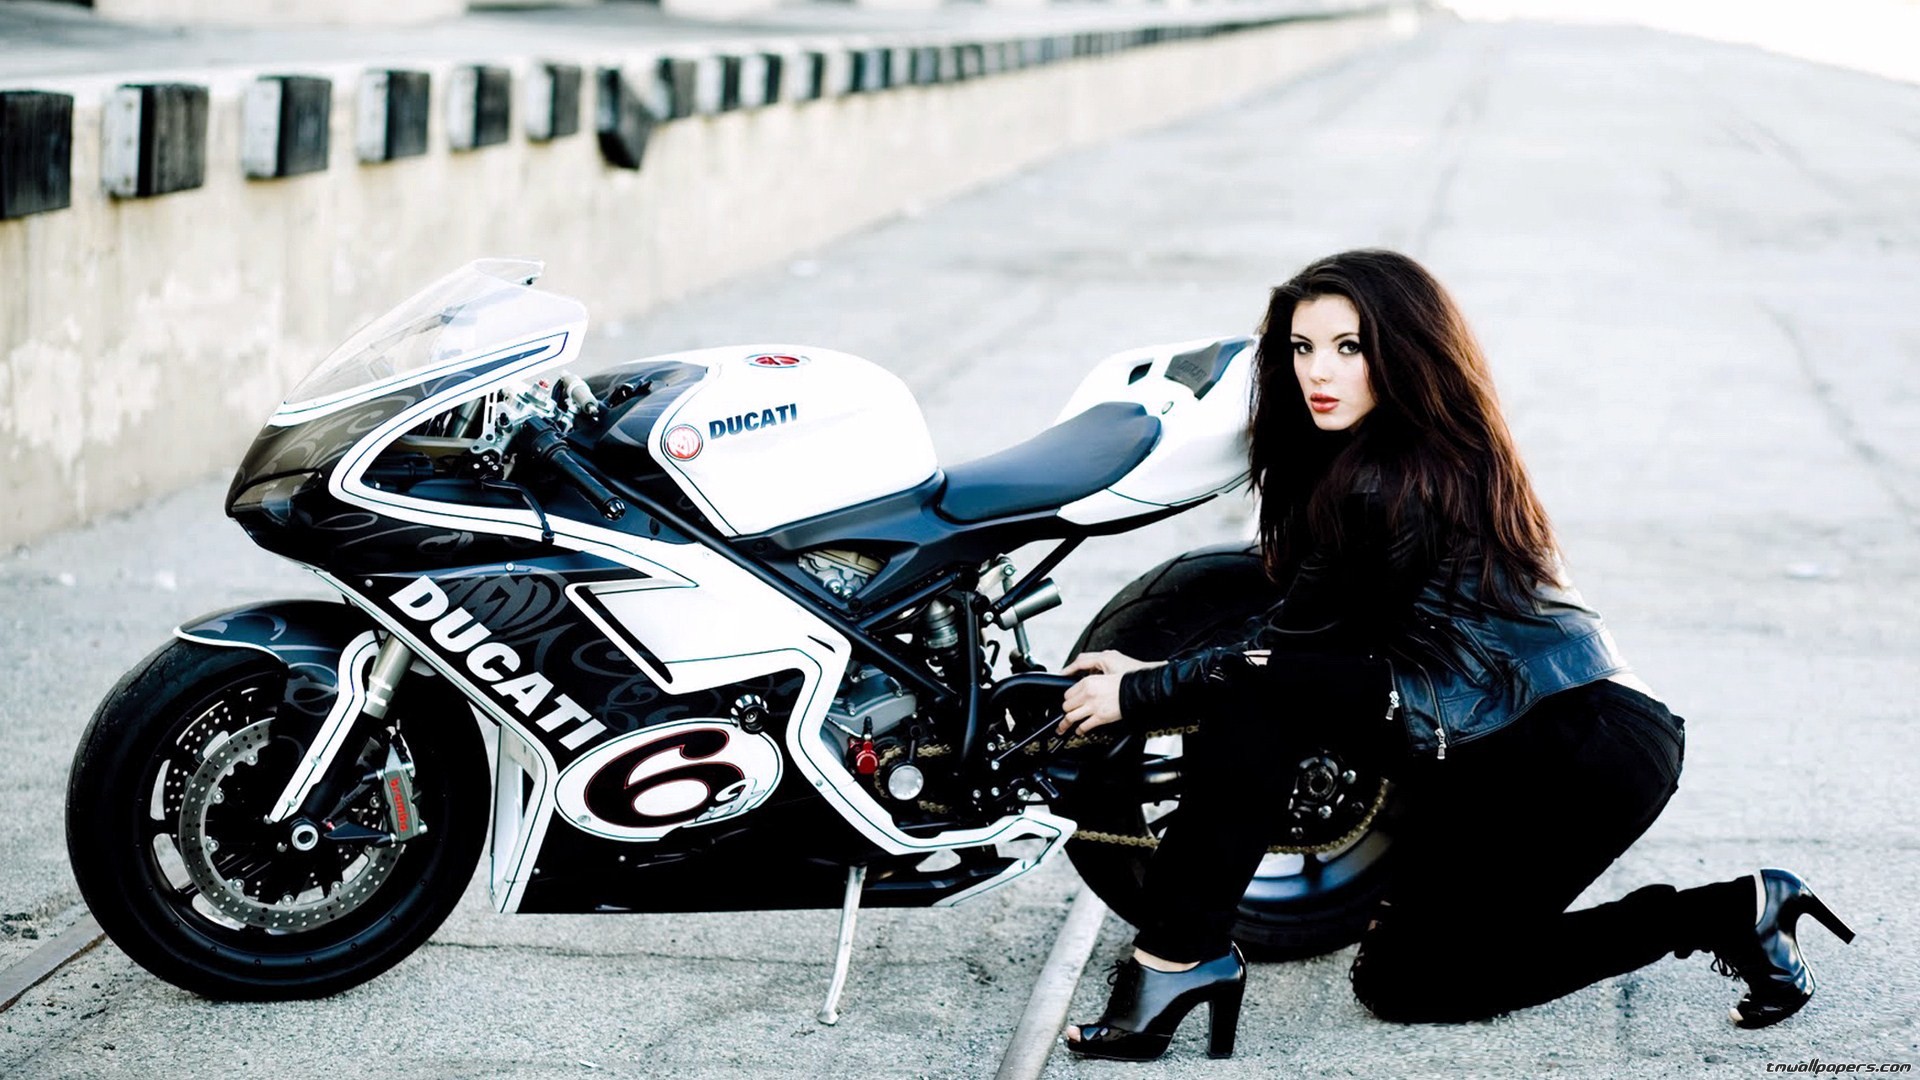 1920x1080 motorcycle girls wallpaper funny photos pictures images 2013 